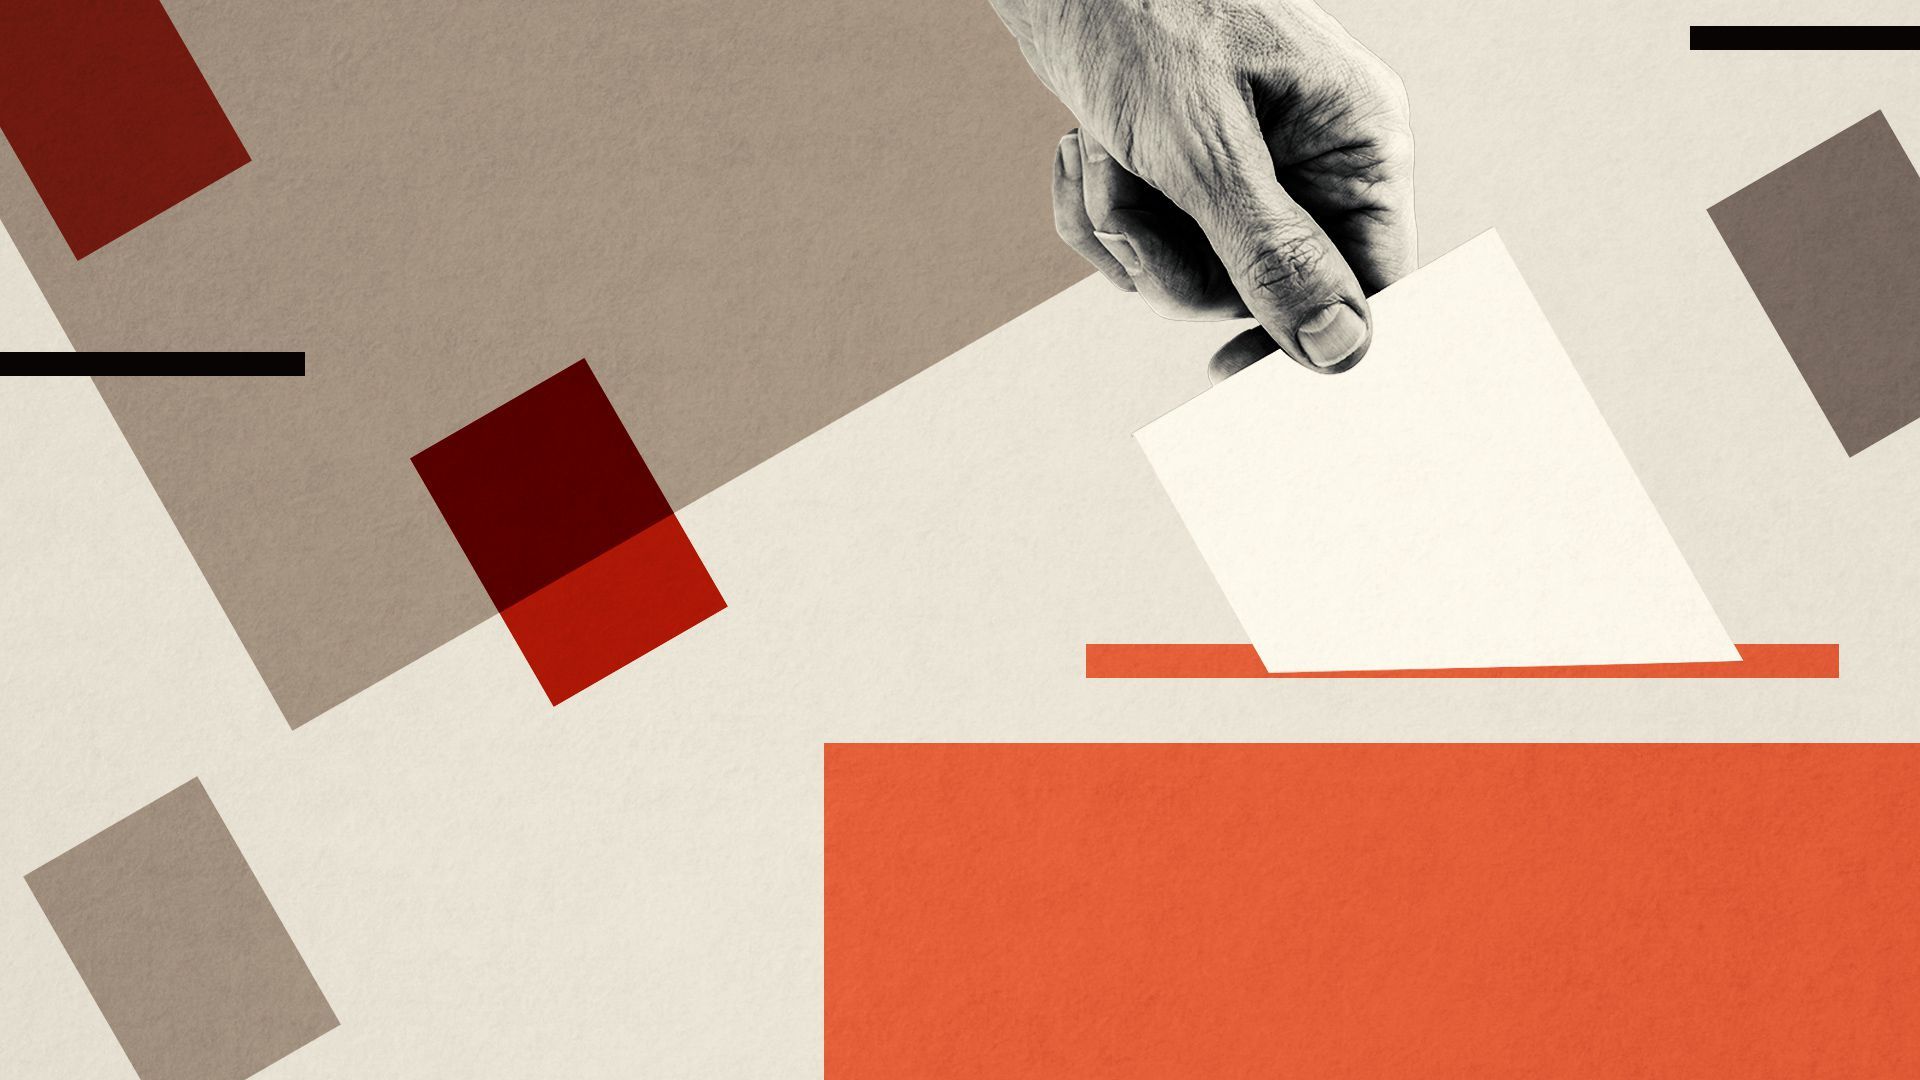 Illustration of a hand placing a ballot in a box surrounded by abstract shapes.